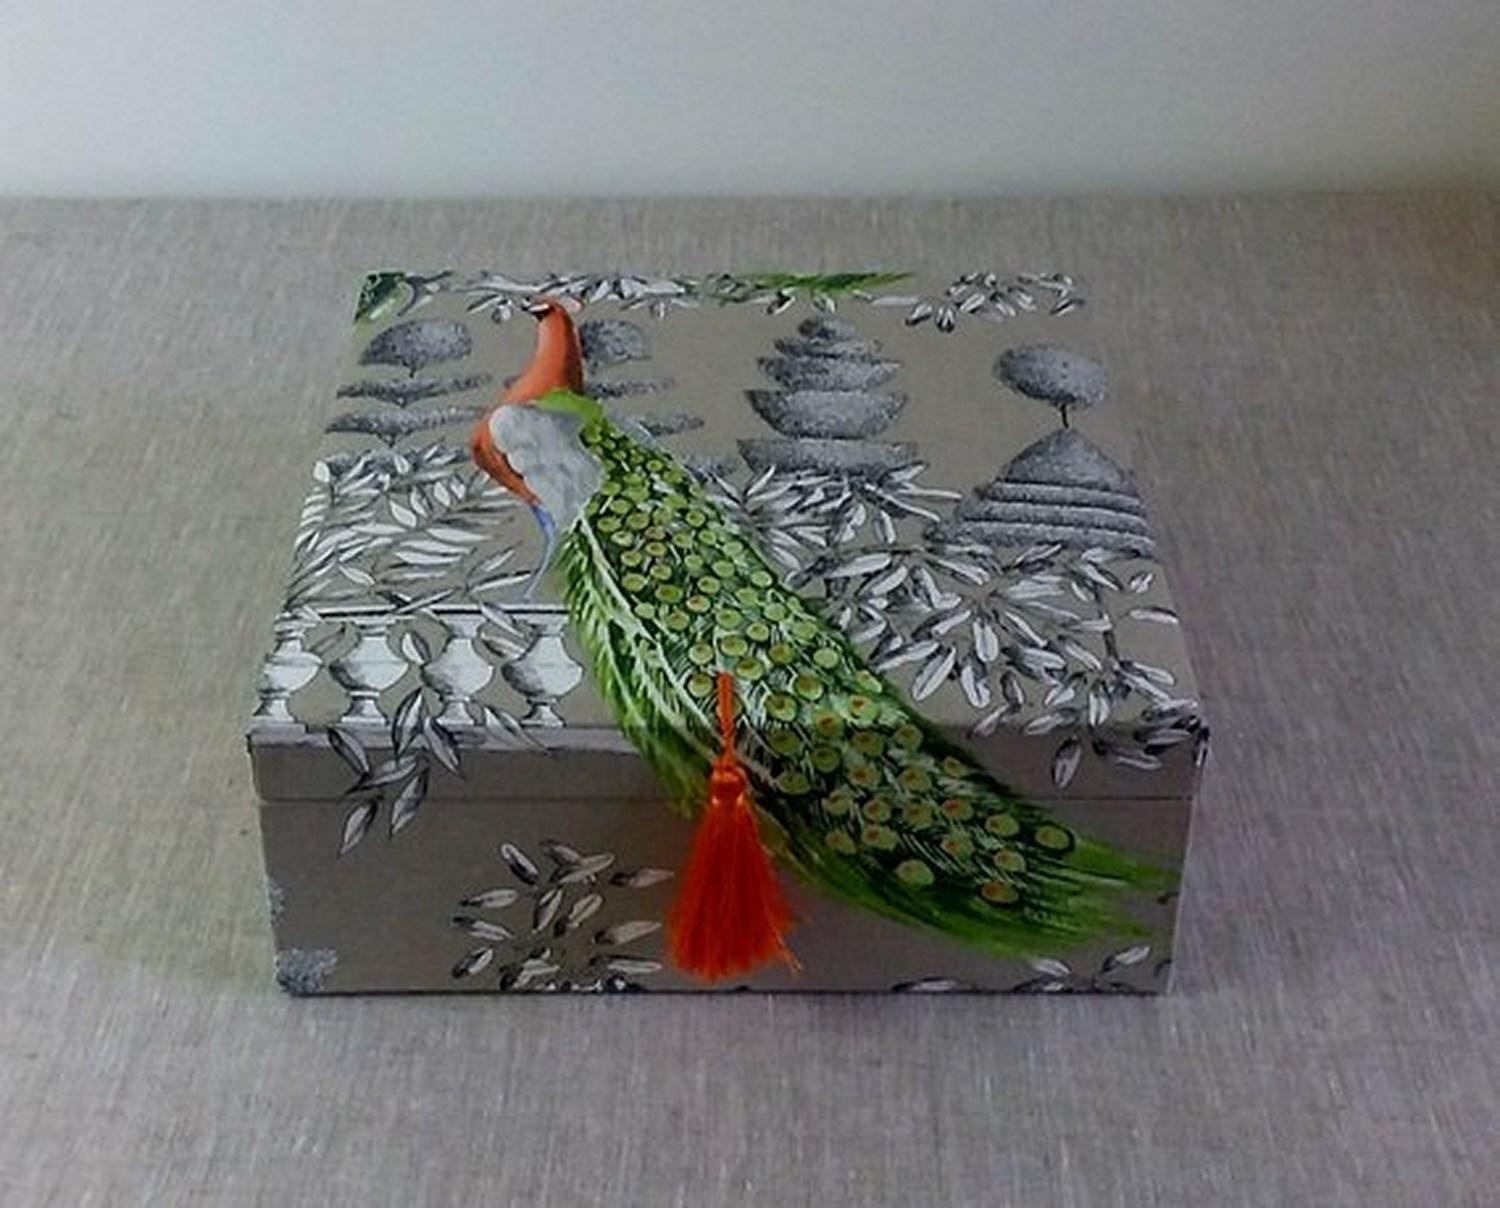 Beautiful storage box entirely handmade

Perfect for storing your Hermès scarves !

Made of Wood Cardboard

Covered with Cotton Fabric

The lid is lightly padded and embellished with an orange pompom

Pattern: Birds

Colorways: Grey, Green, Red,